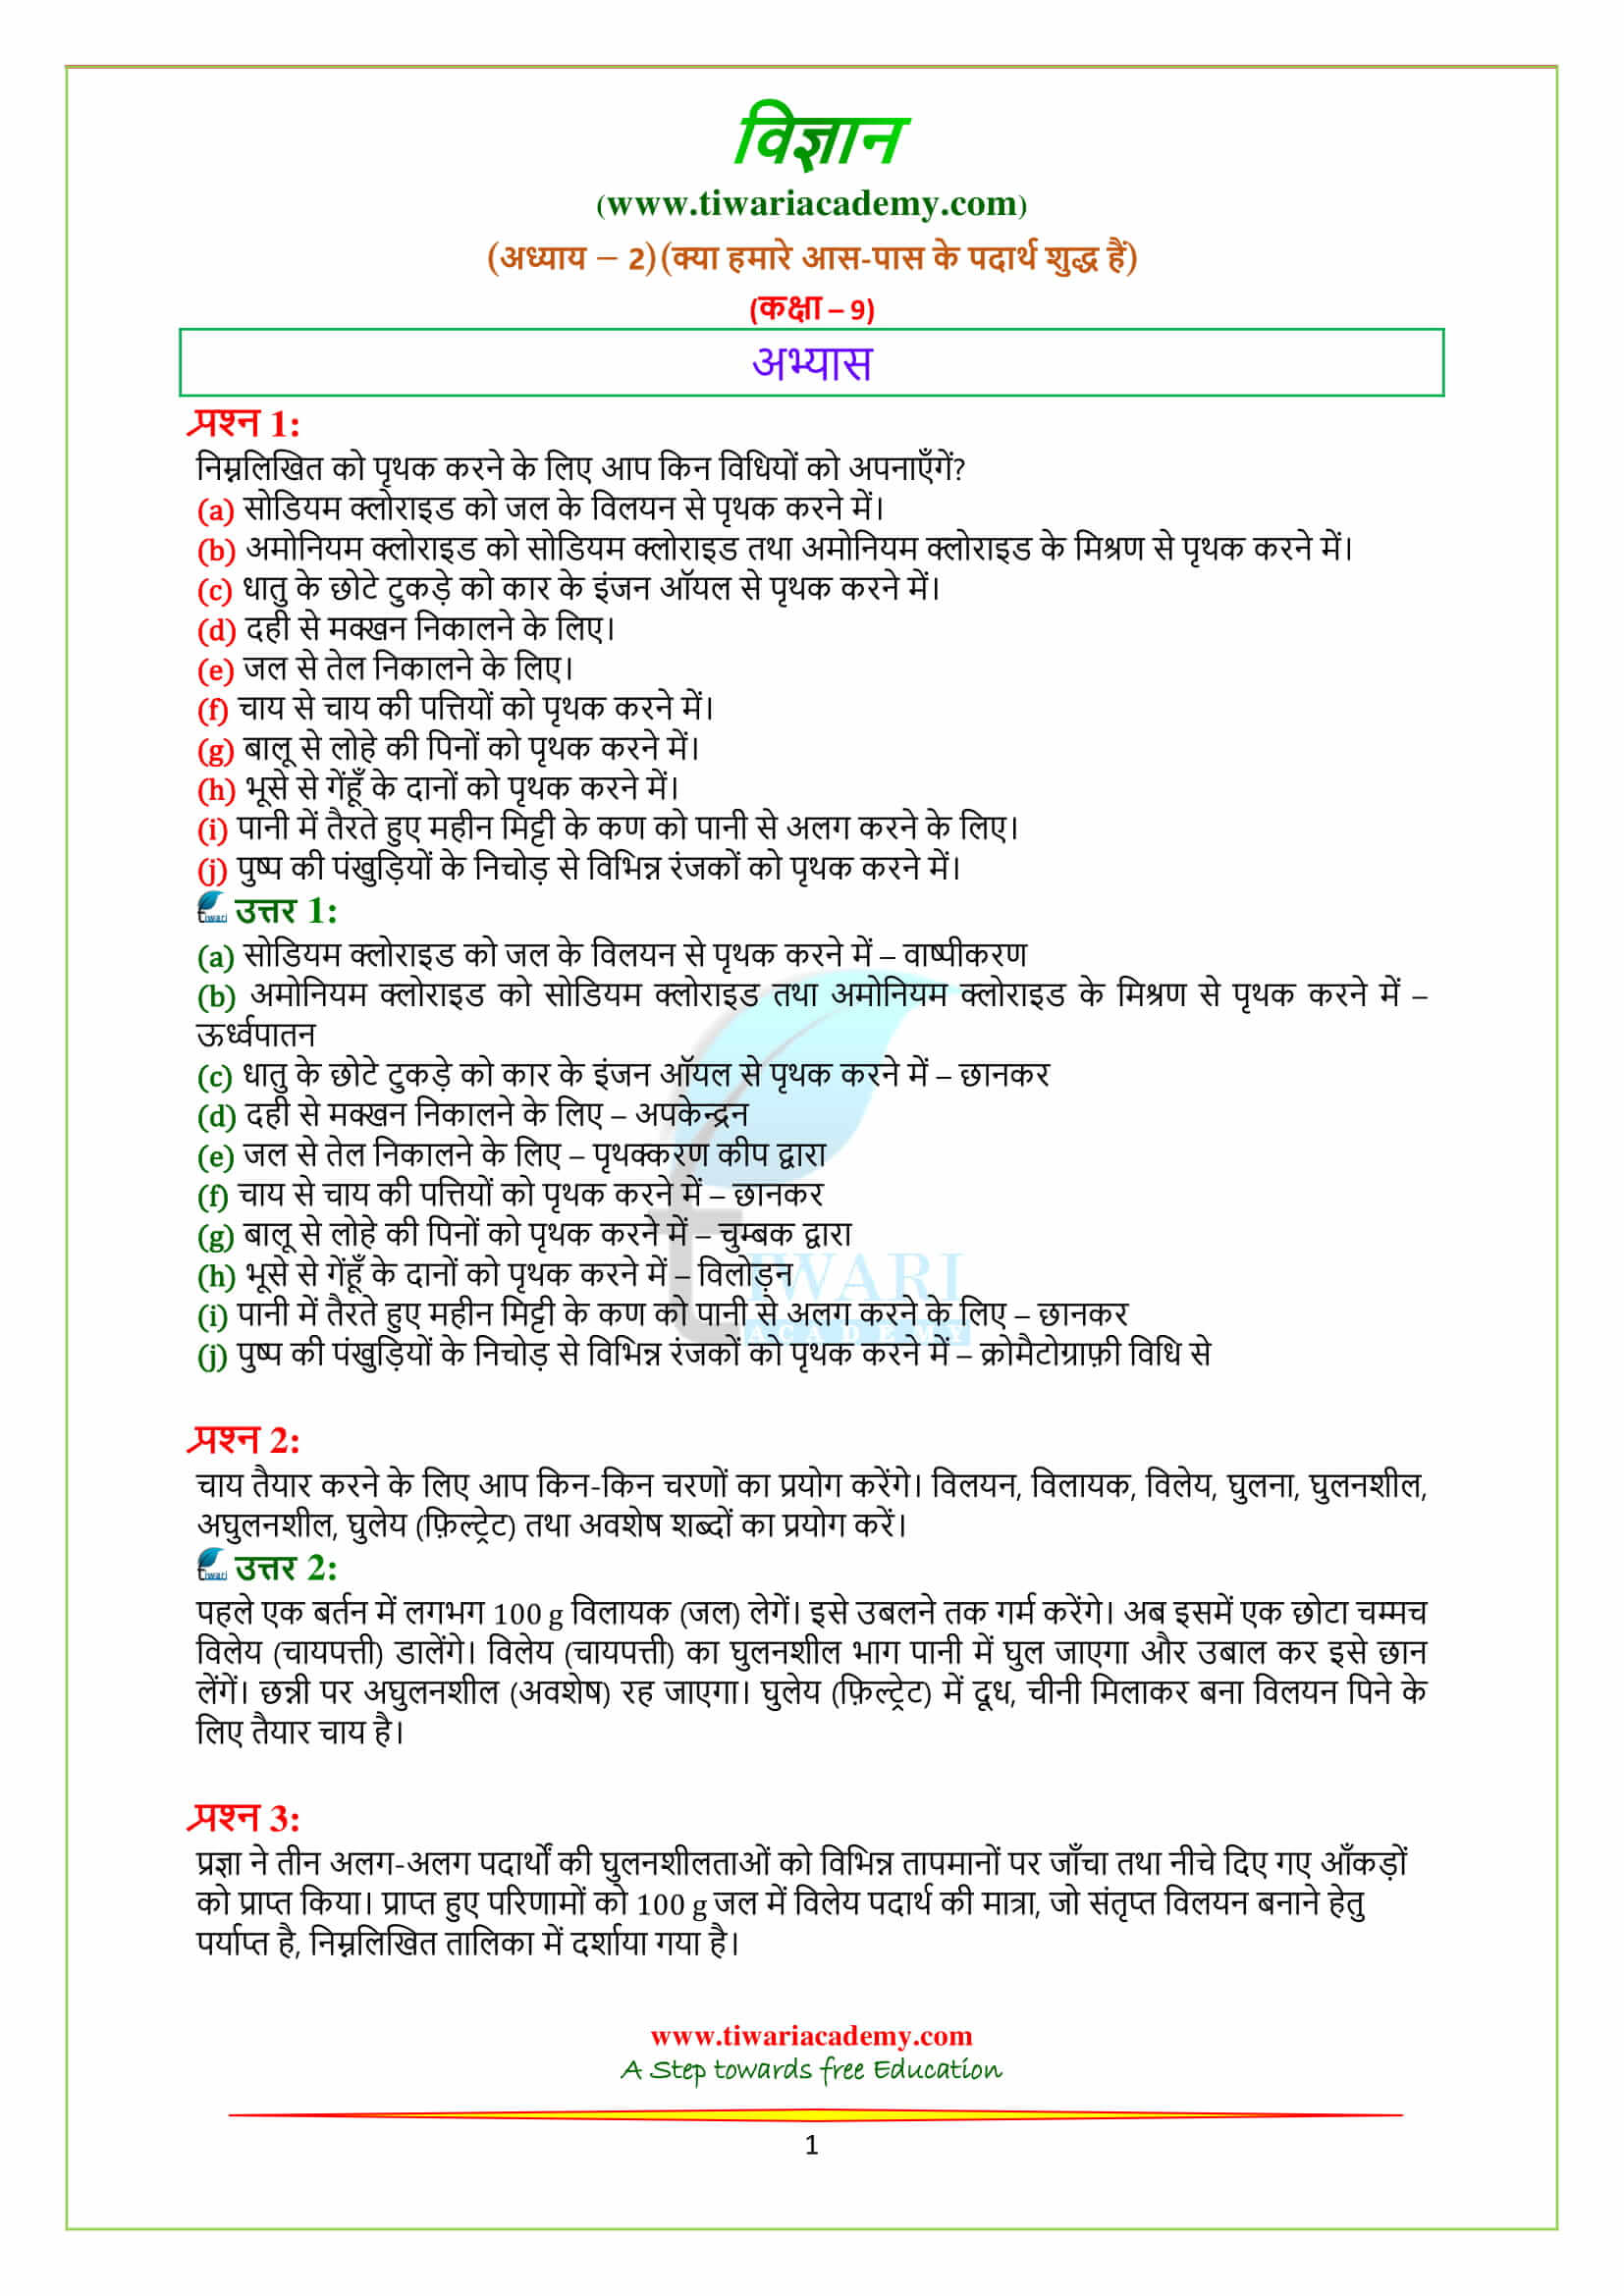 NCERT Solutions for Class 9 Science Chapter 2 in hindi medium all questions